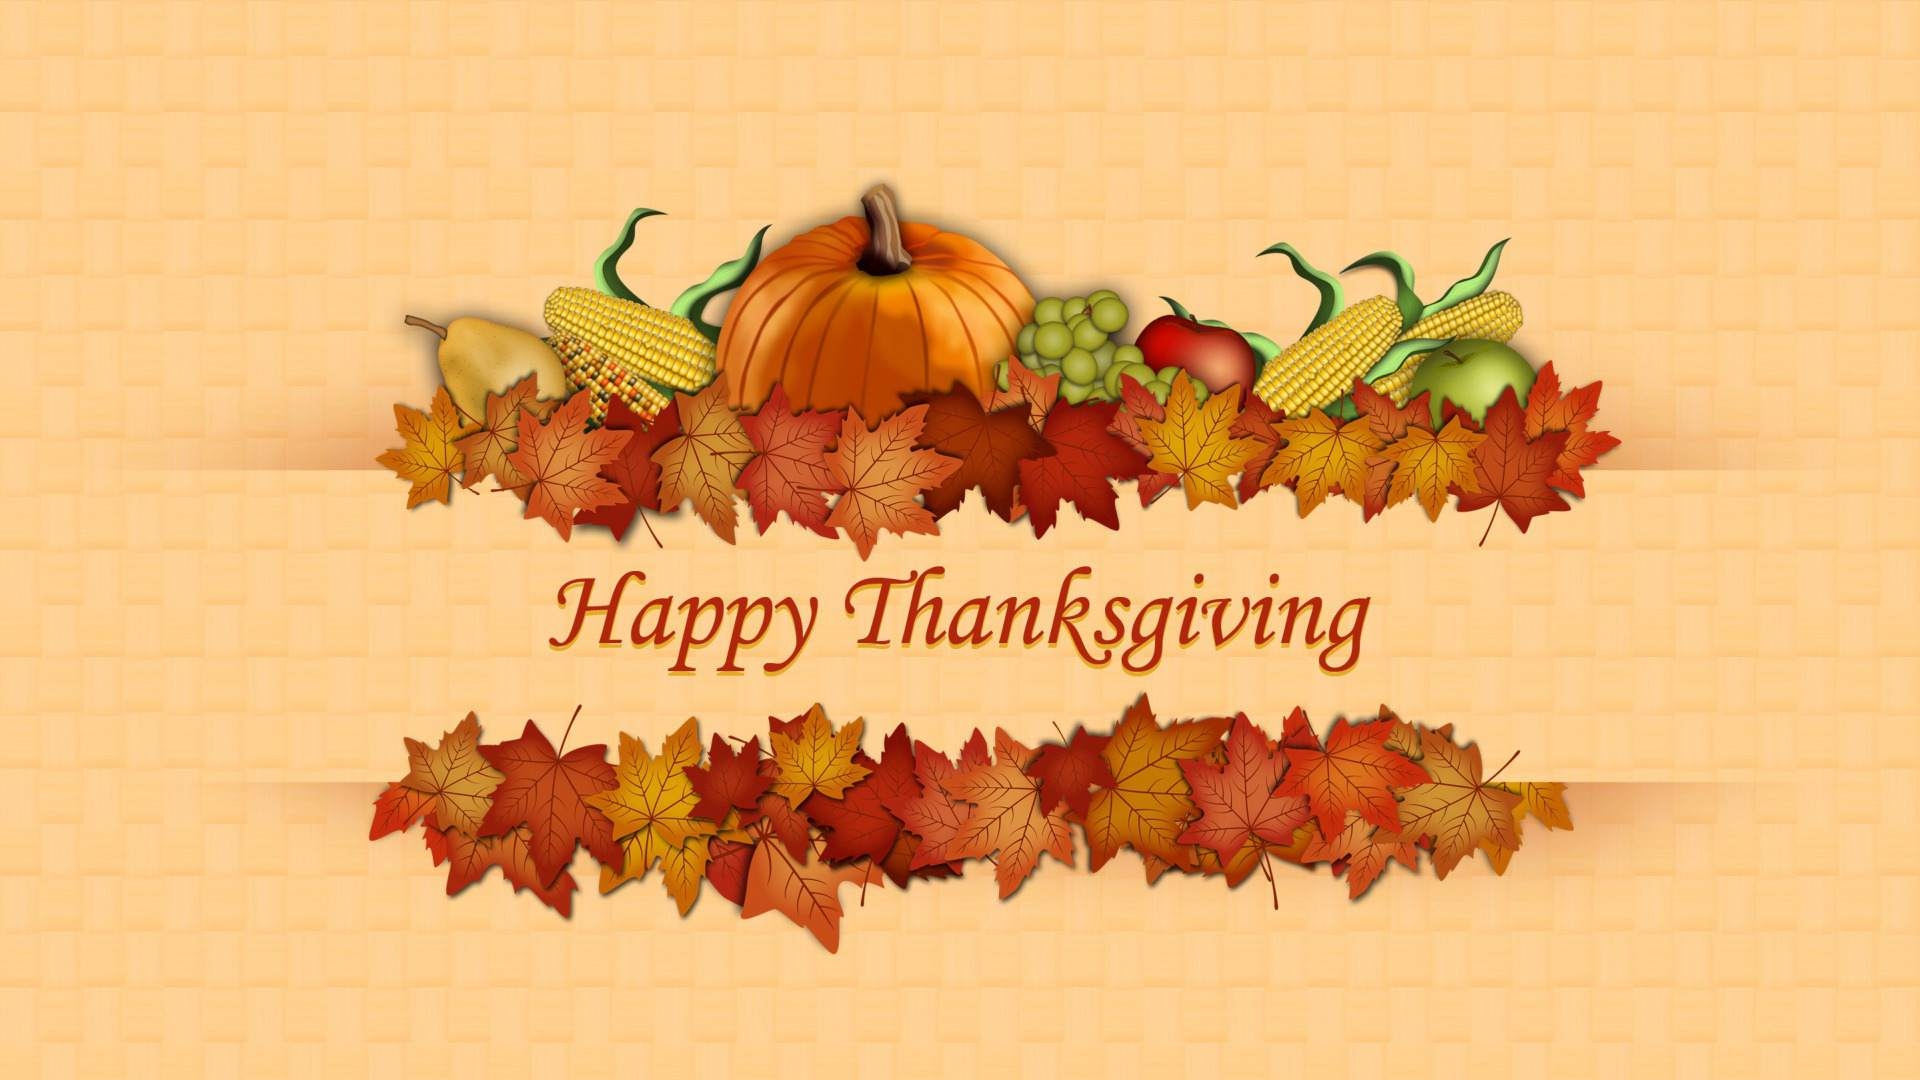 Awesome Thanksgiving Wallpaper Desktop Collections